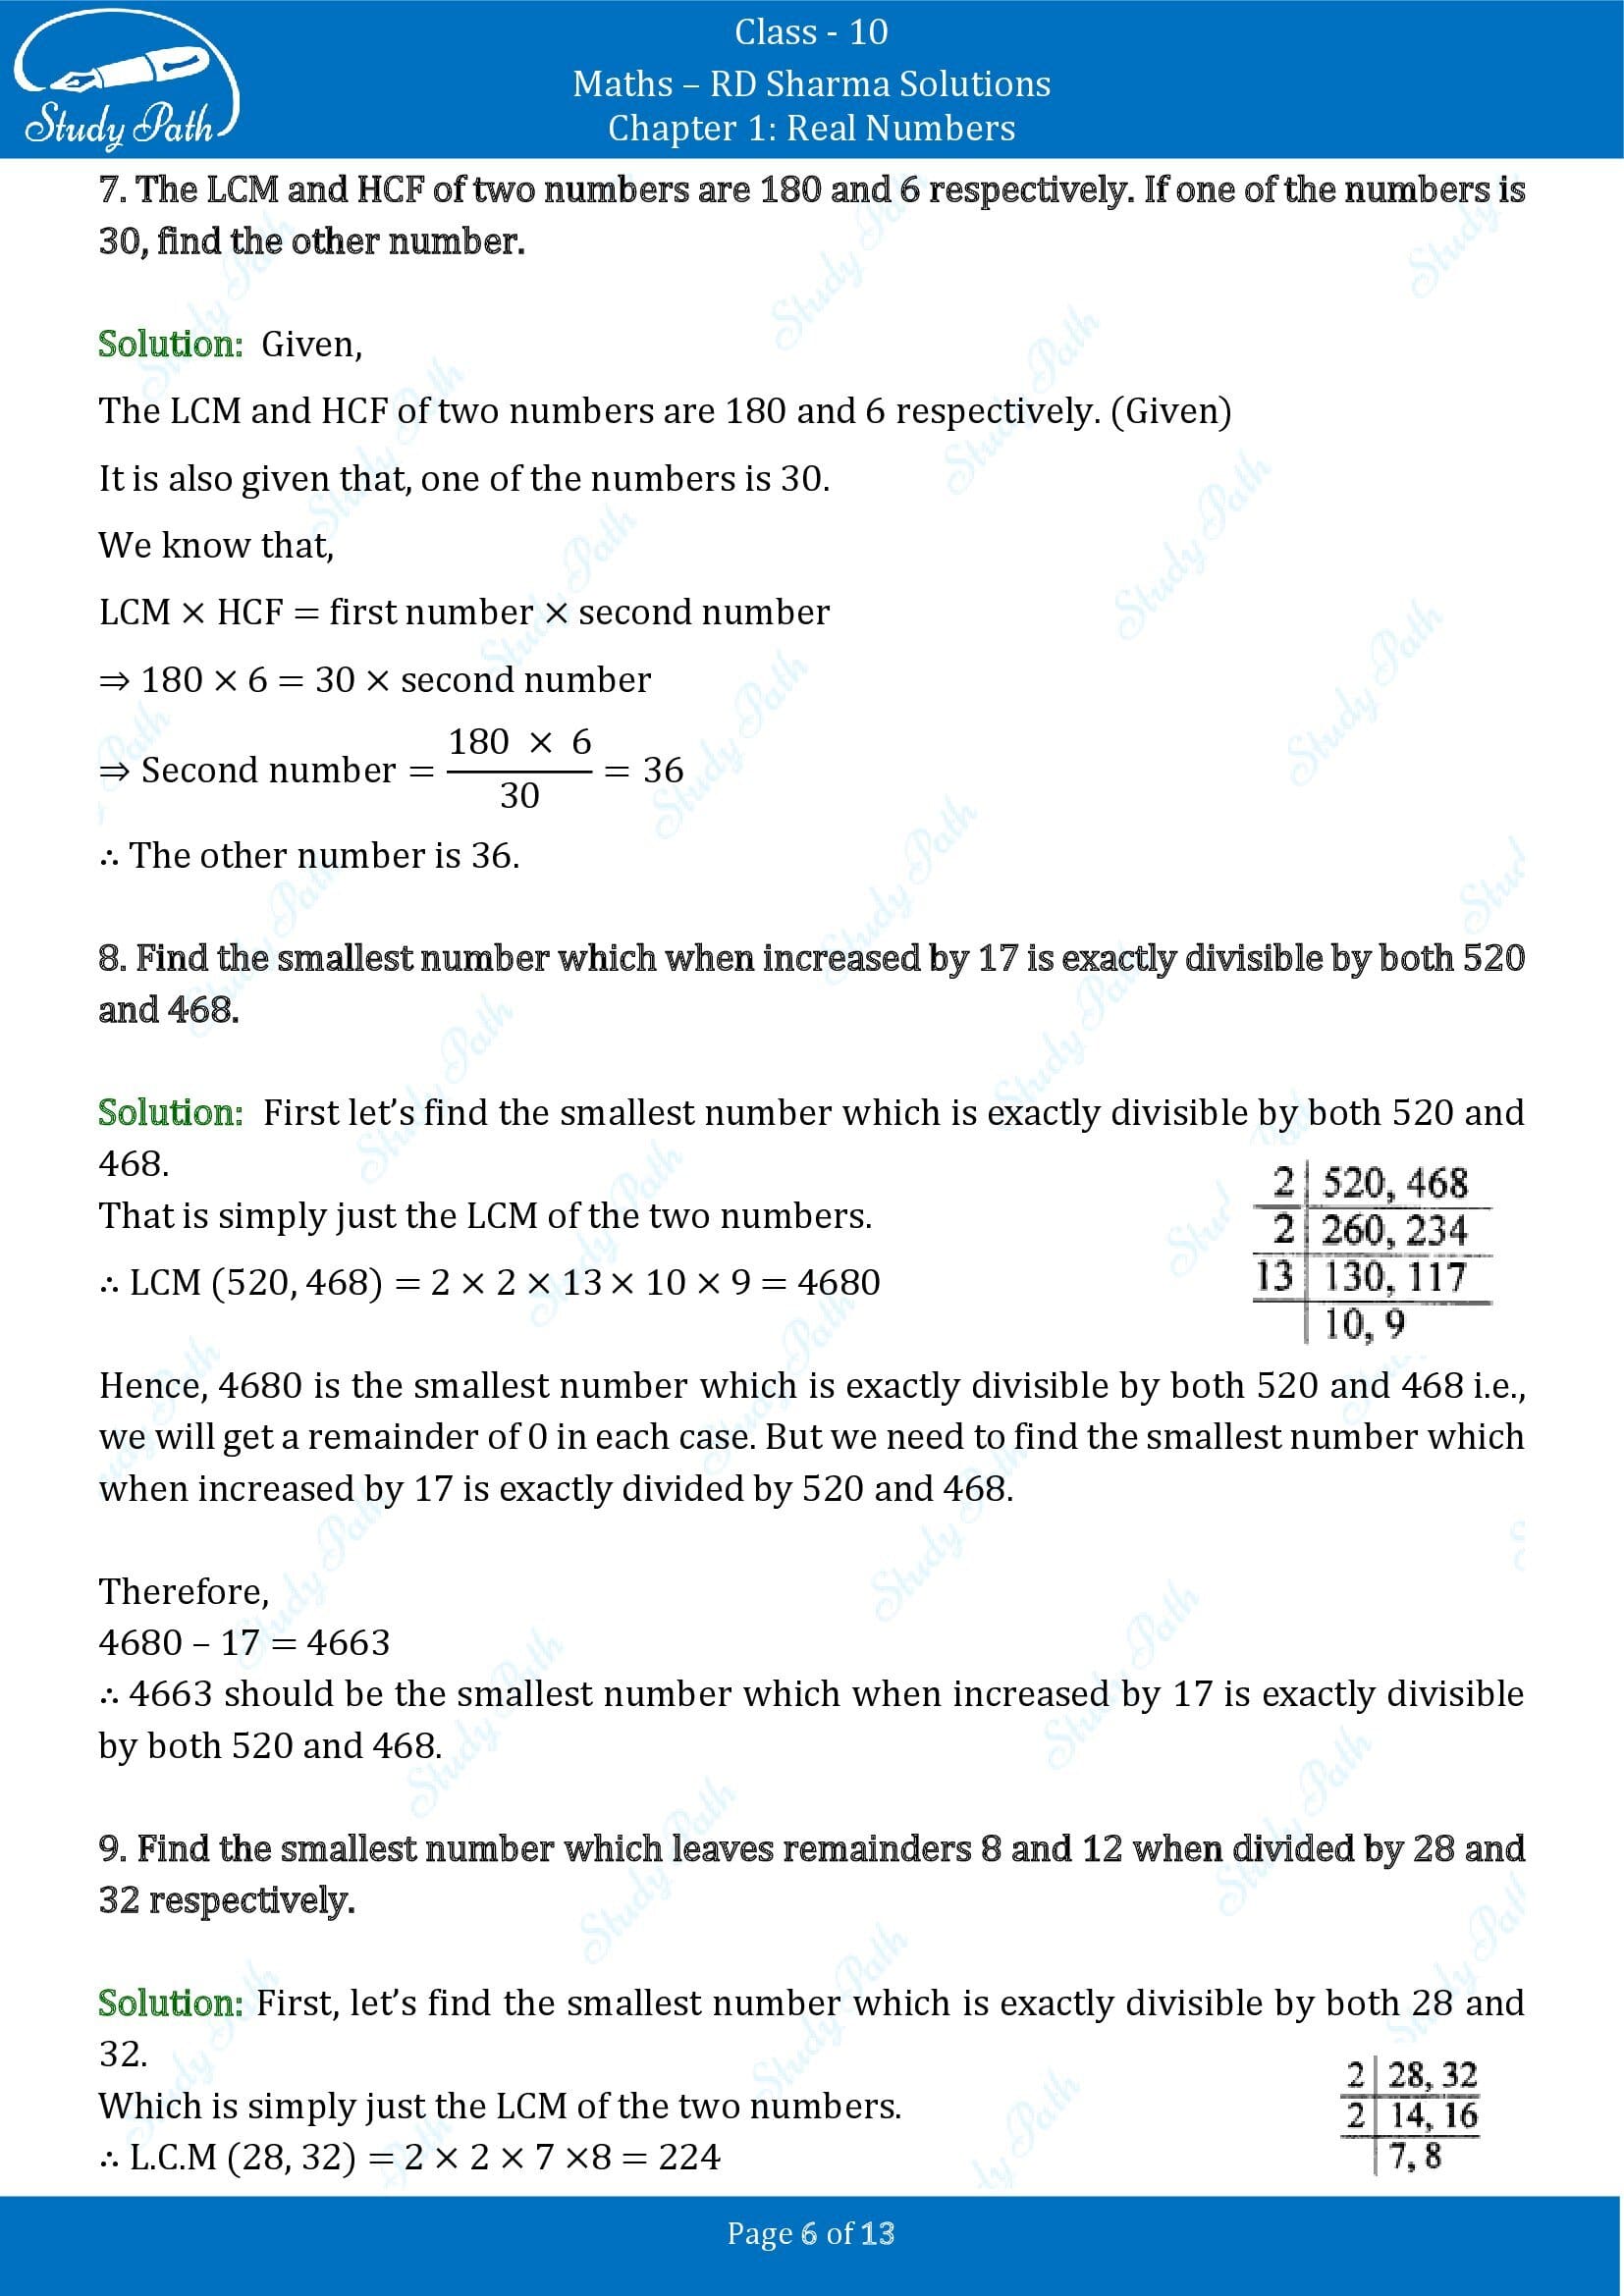 RD Sharma Solutions Class 10 Chapter 1 Real Numbers Exercise 1.4 00006